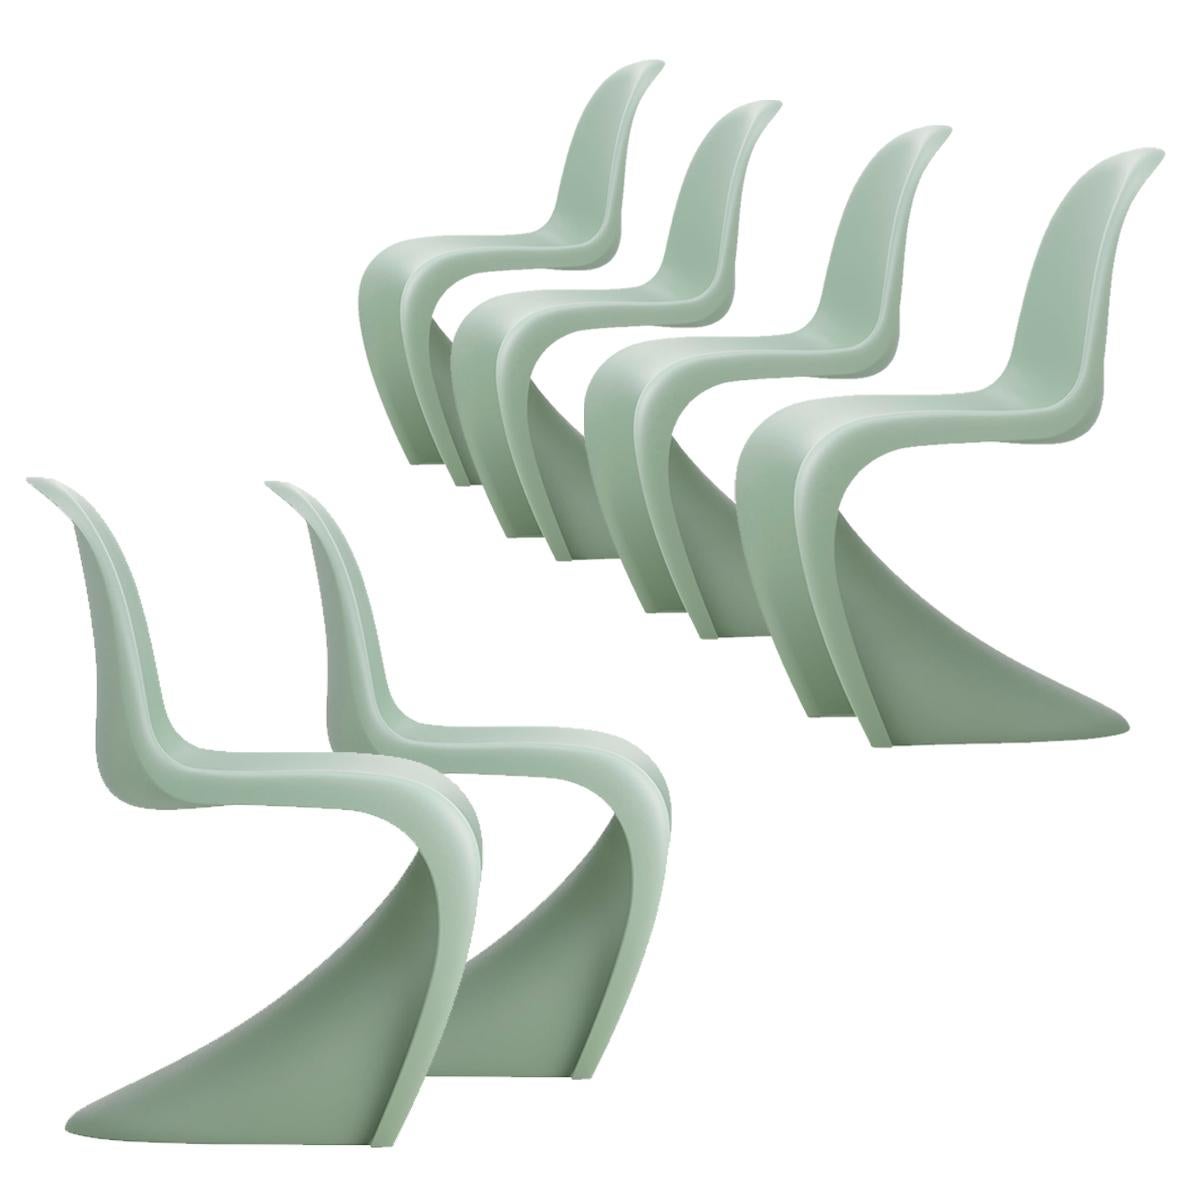 Chairs designed by Verner Panton in 1959/1999.
Manufactured by Vitra, Switzerland.

The Panton chair is a classic in the history of furniture design. Conceived by Verner Panton in 1960, the chair was developed for serial production in